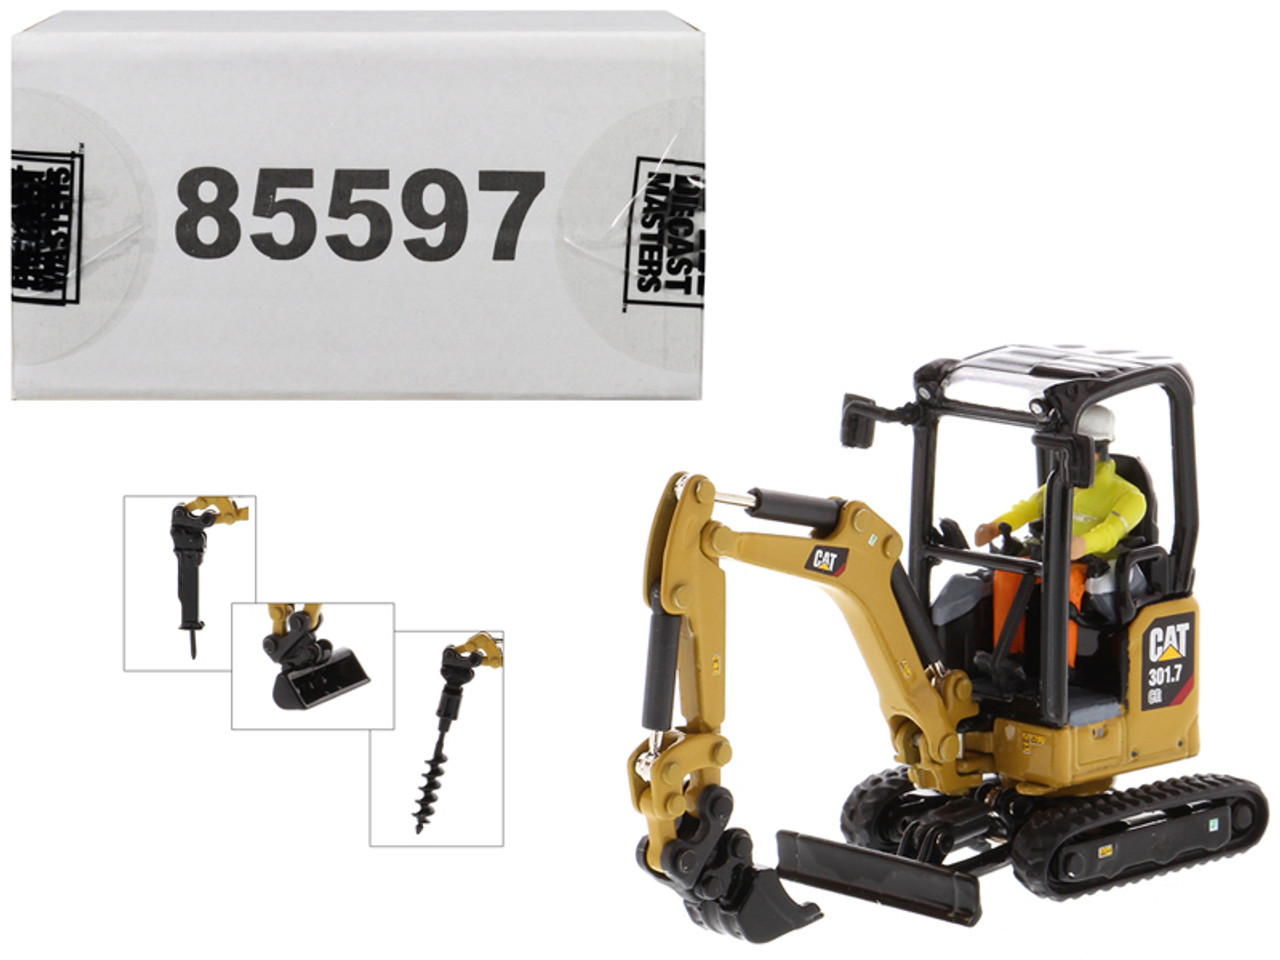 CAT Caterpillar 301.7 CR Next Generation Mini Hydraulic Excavator with Work Tools and Operator "High Line" Series 1/50 Diecast Model by Diecast Masters